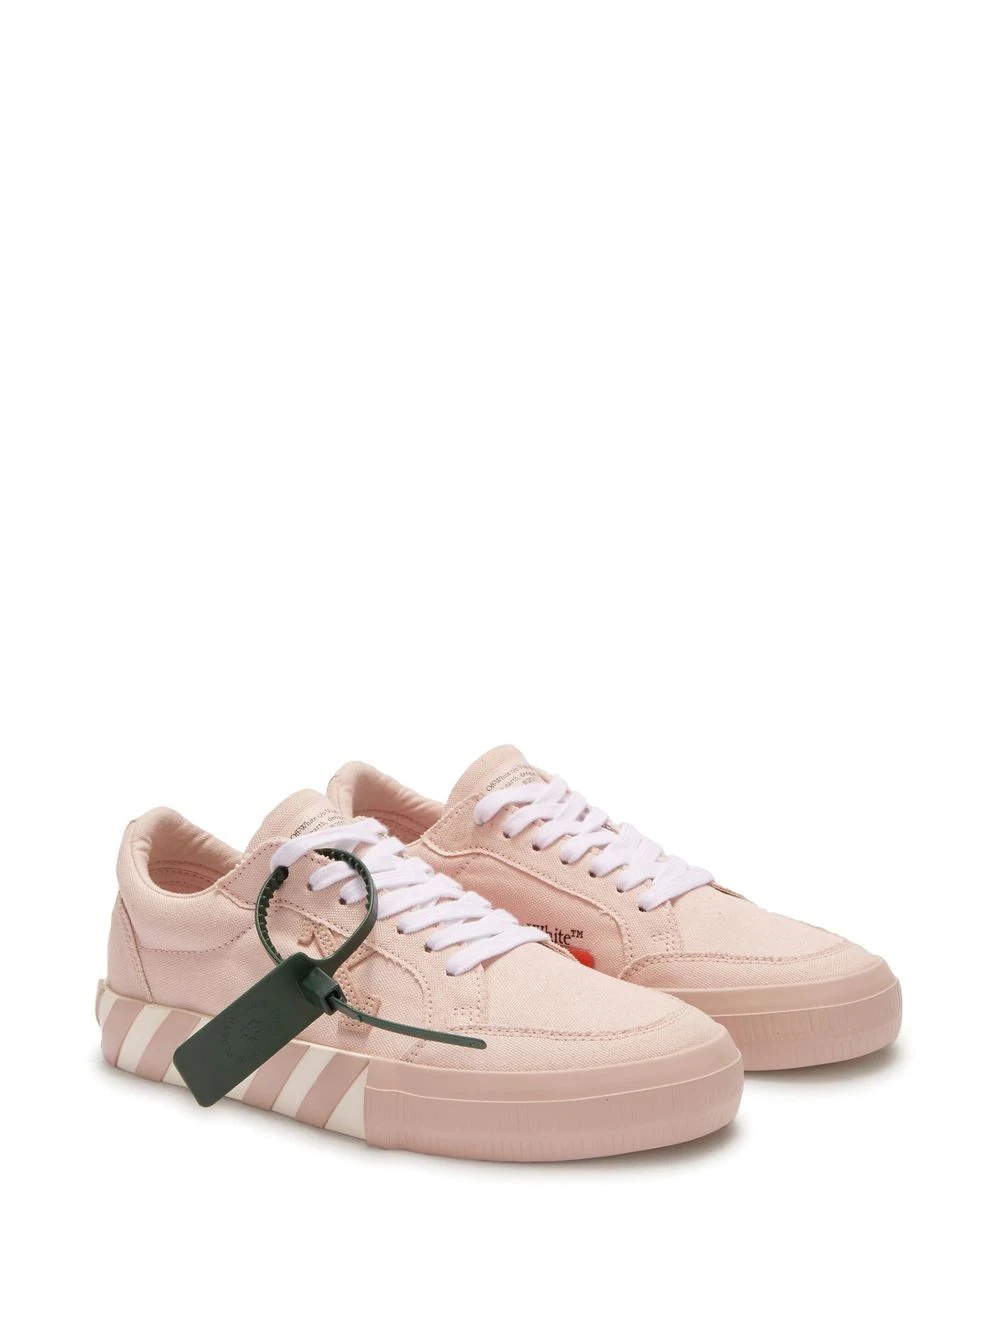 lo-top tag sneakers - 2